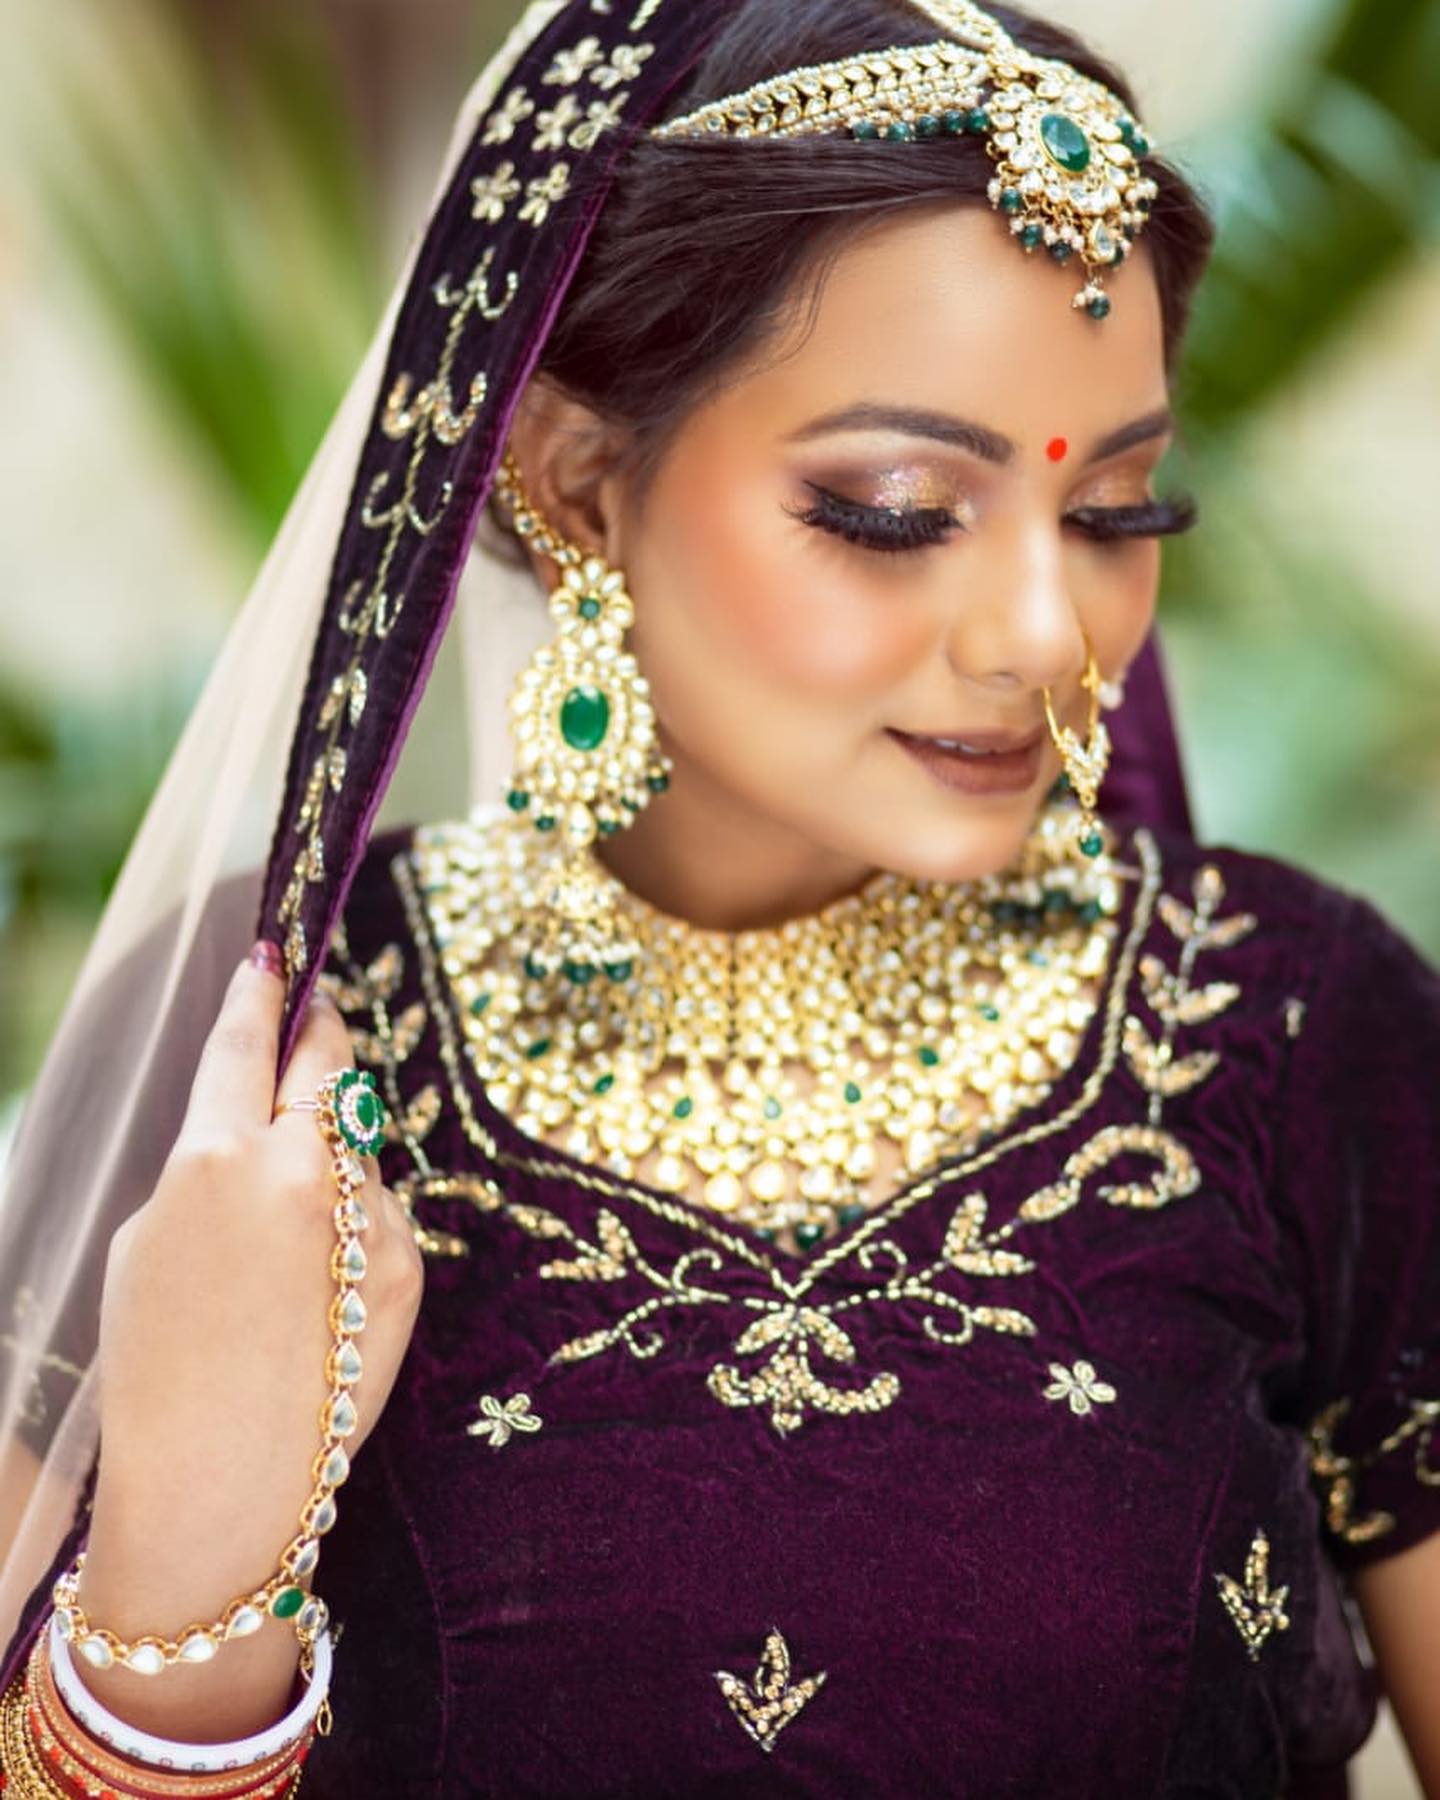 Richa Dave on Instagram One of the looks created at the make up  masterclass at jasmine beaut  Bridal hair and makeup Indian bridal  makeup Bridal makeup images